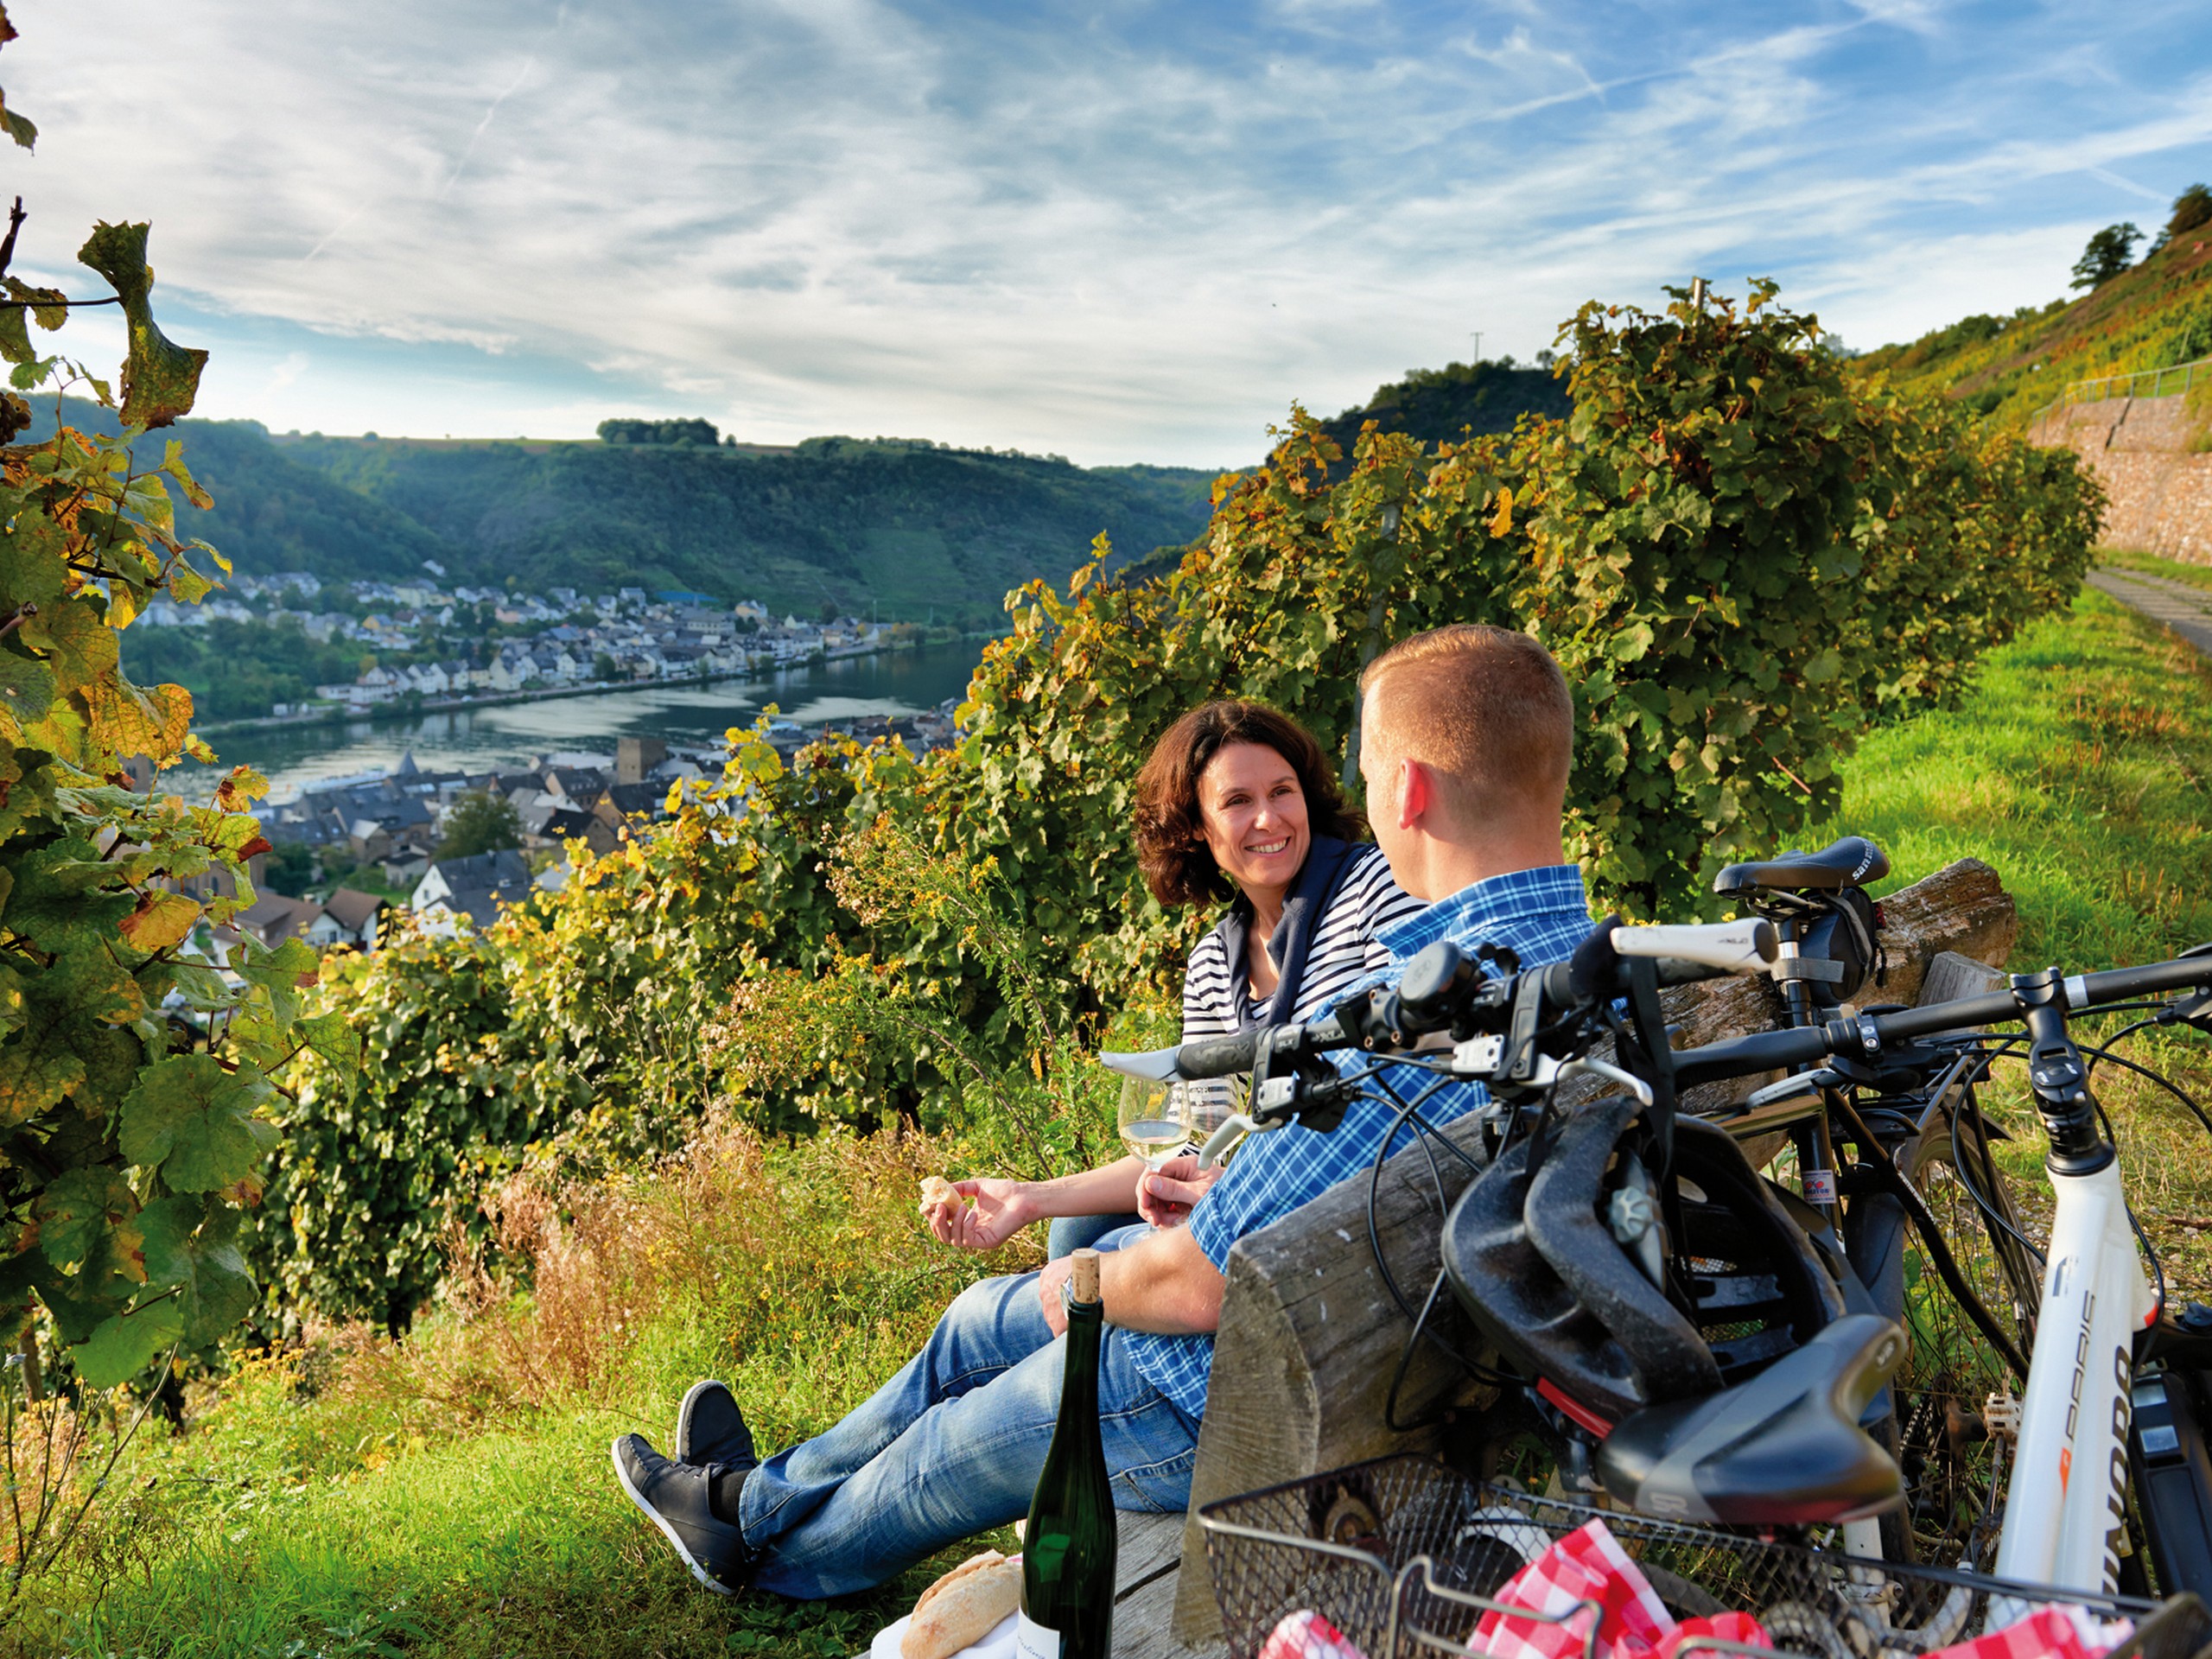 Picnic along the biking route of the Moselle River